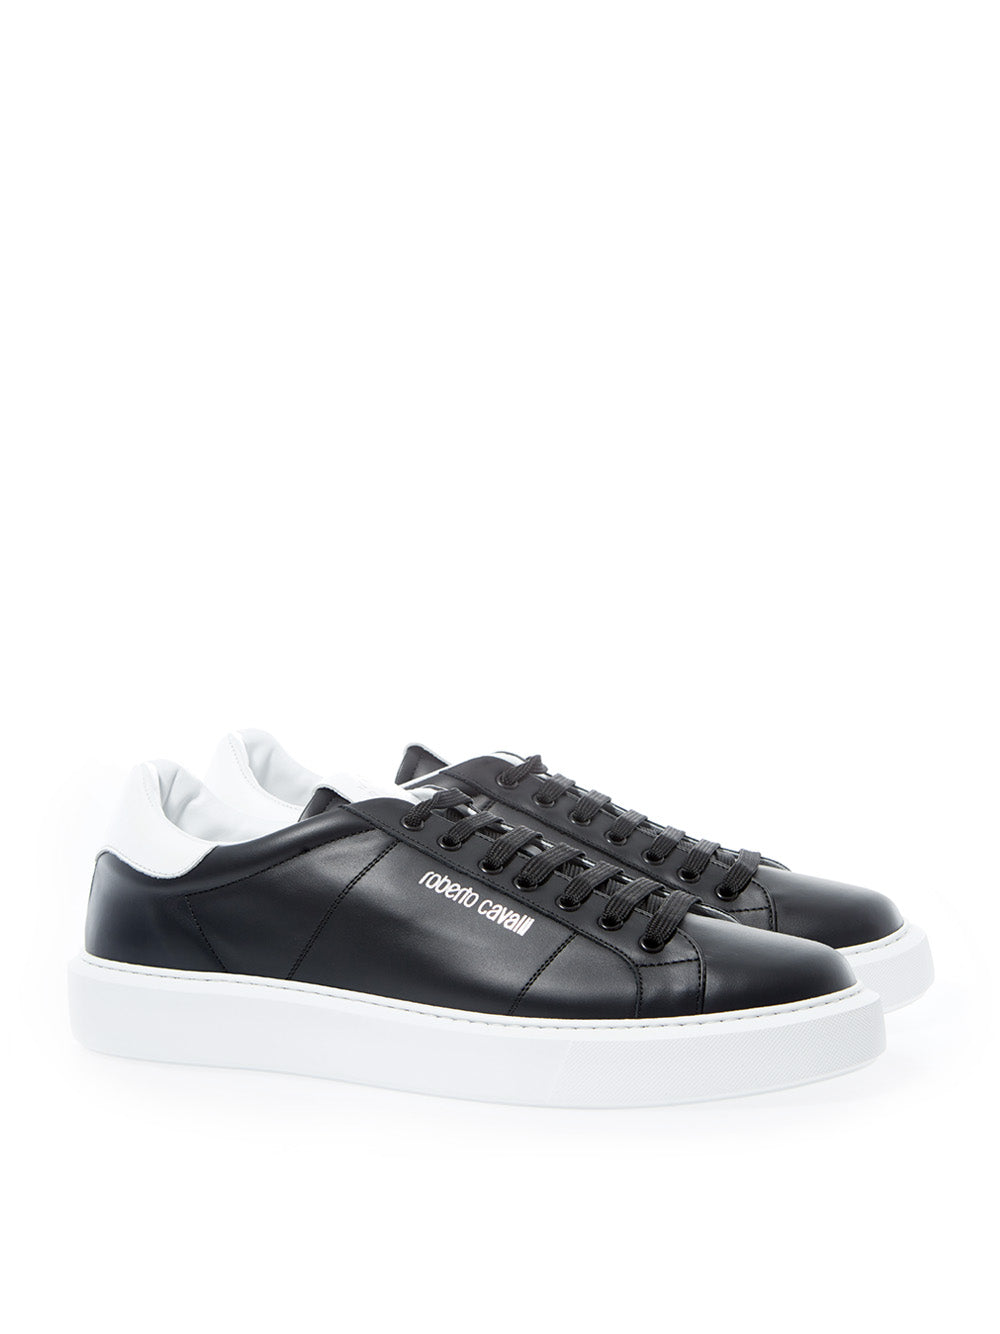 Elegant Black Leather Sneakers with Silver Logo